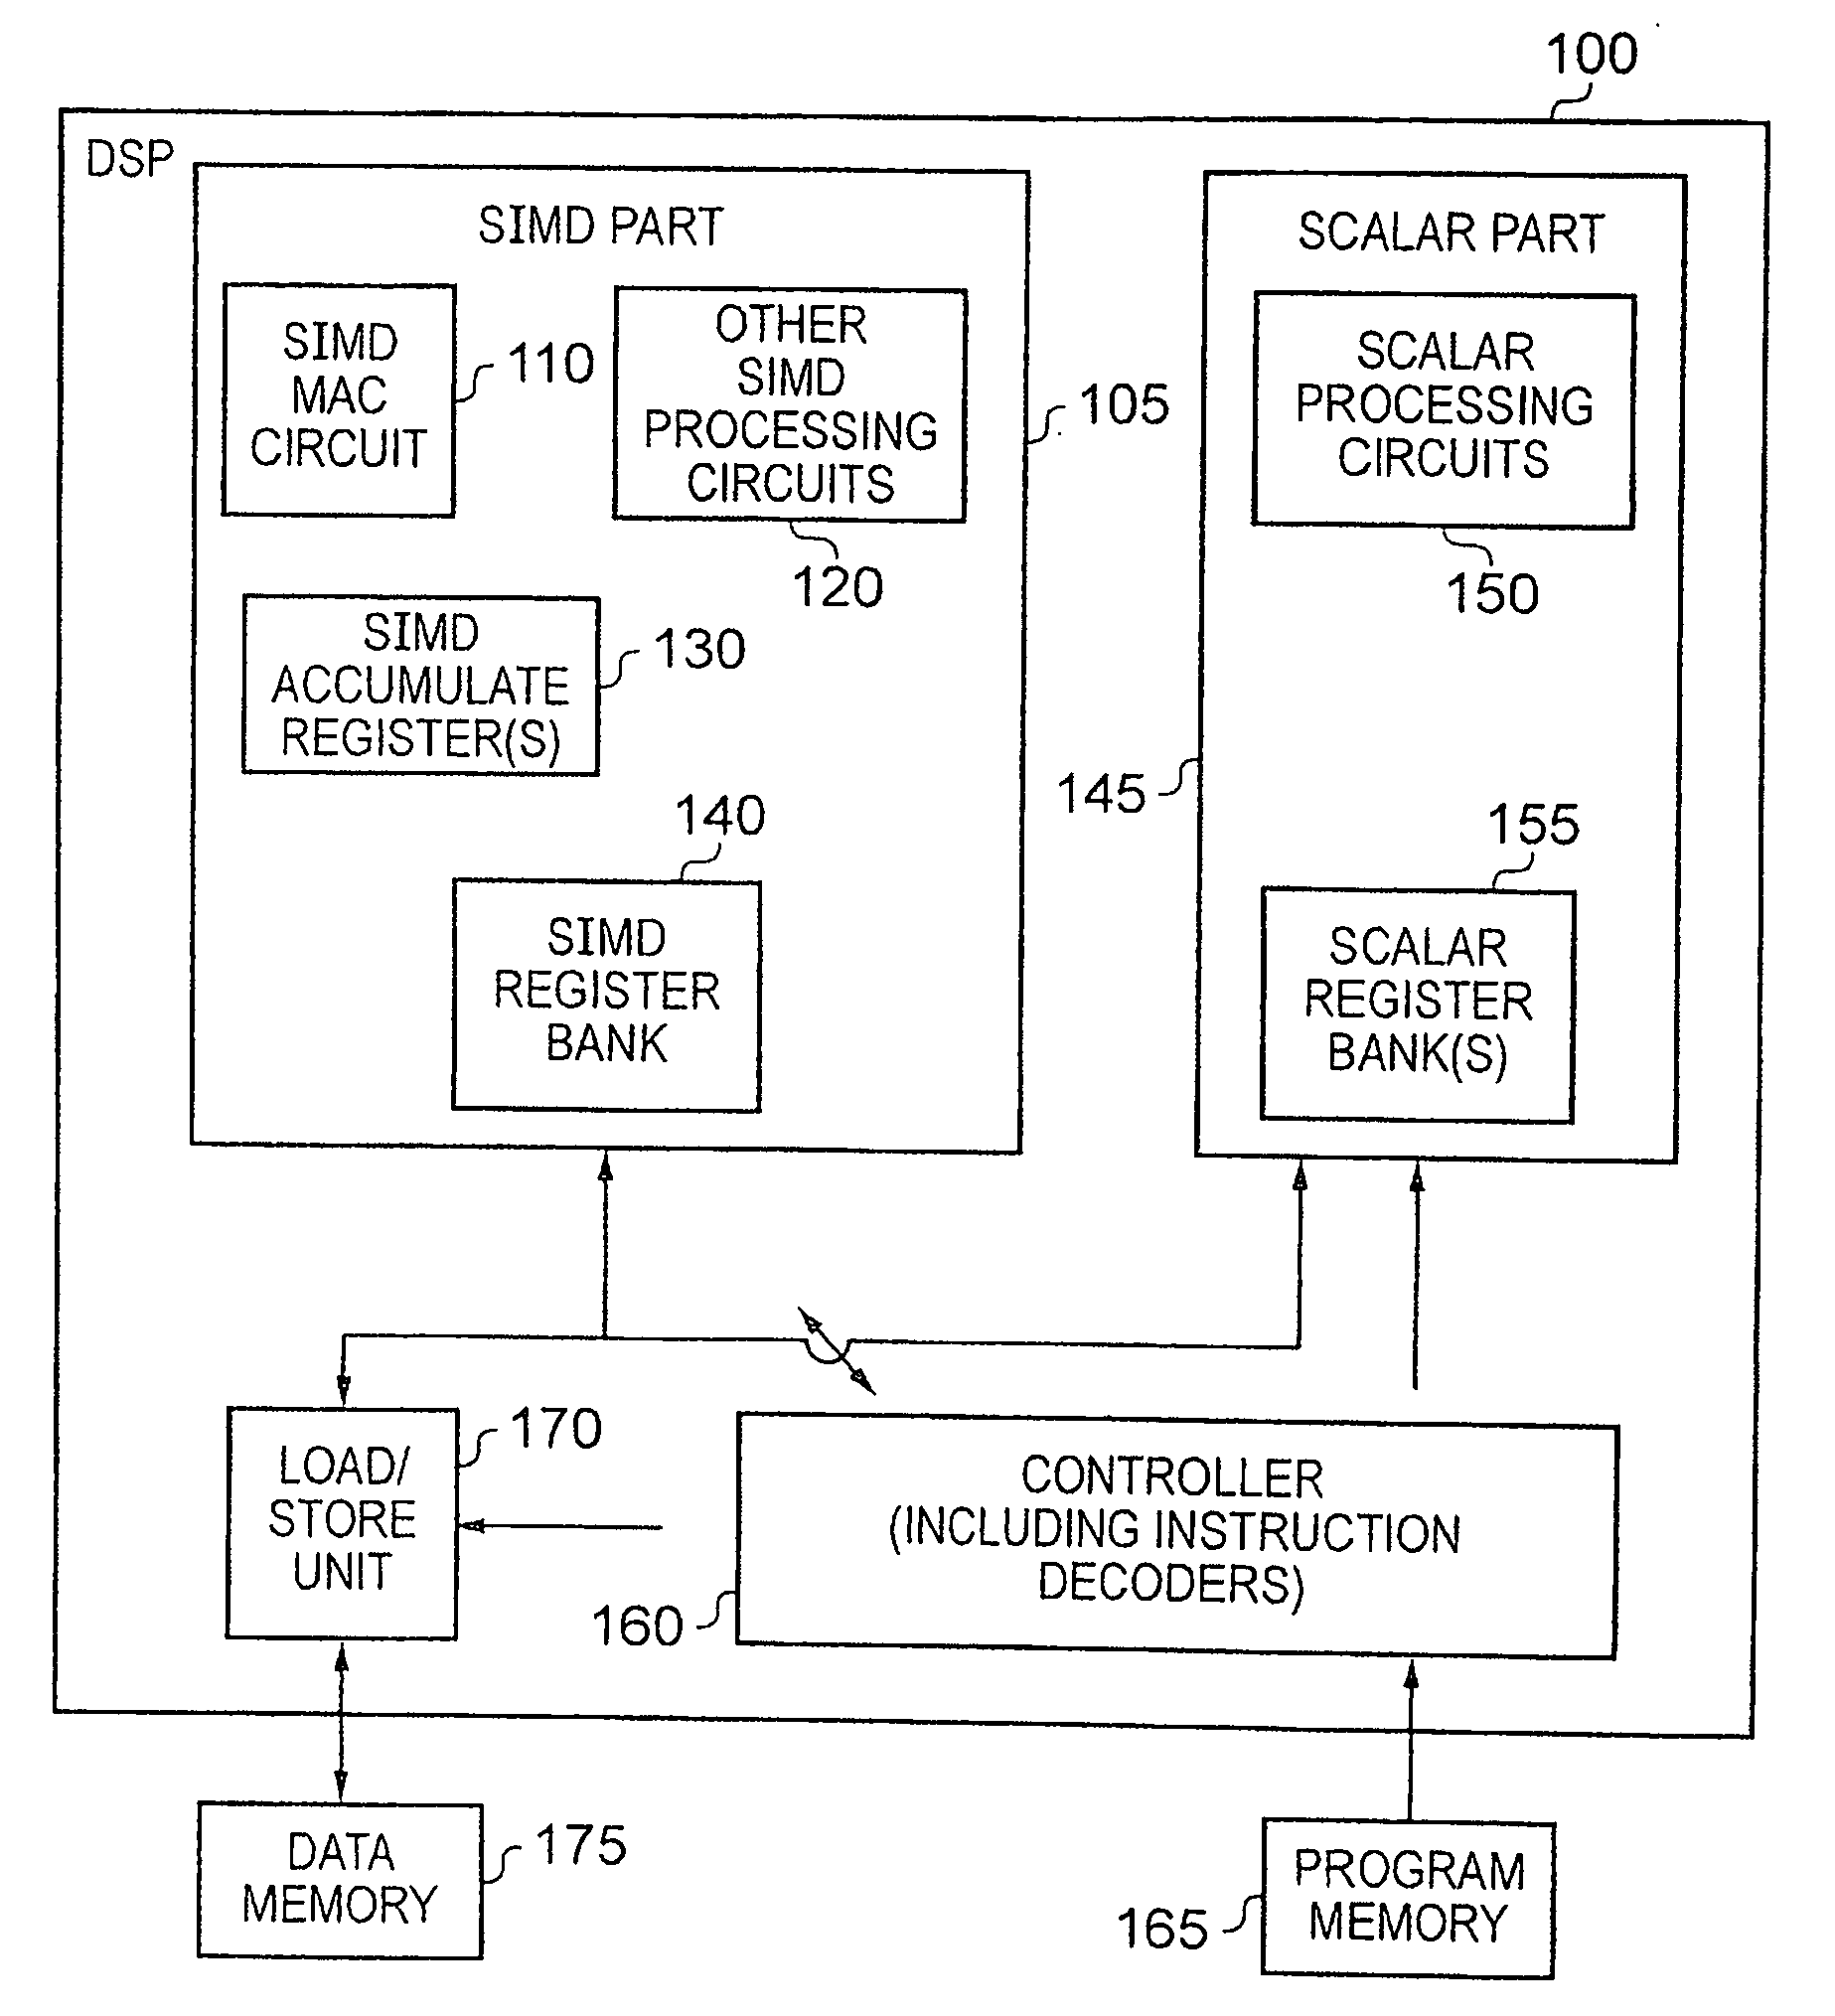 Apparatus and Method for Performing SIMD Multiply-Accumulate Operations